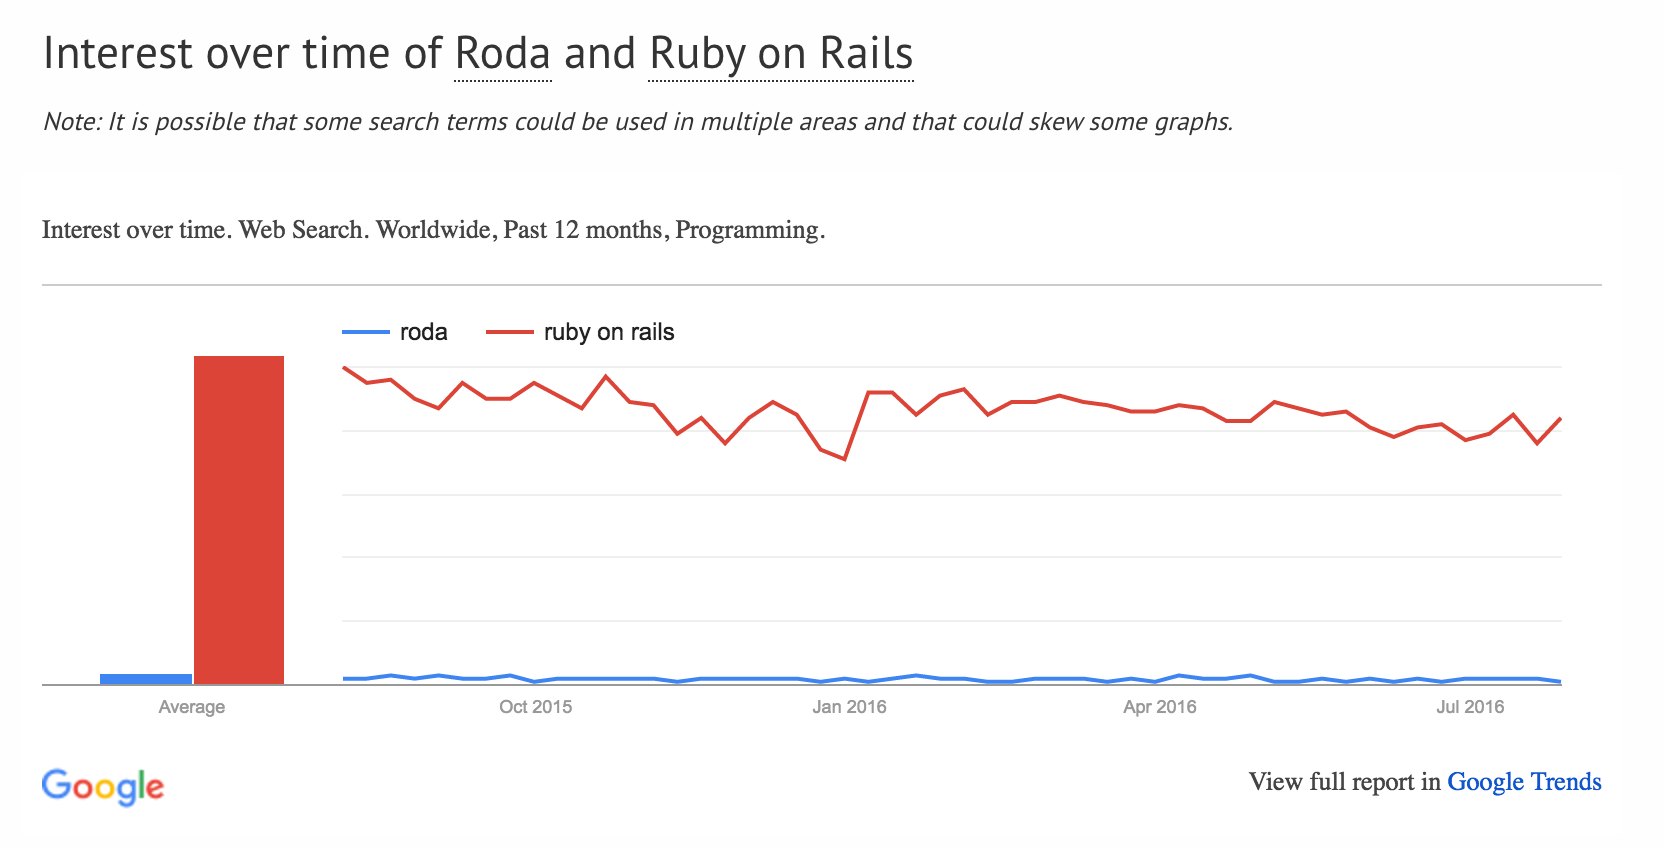 Interest over time of Roda and Ruby on Rails